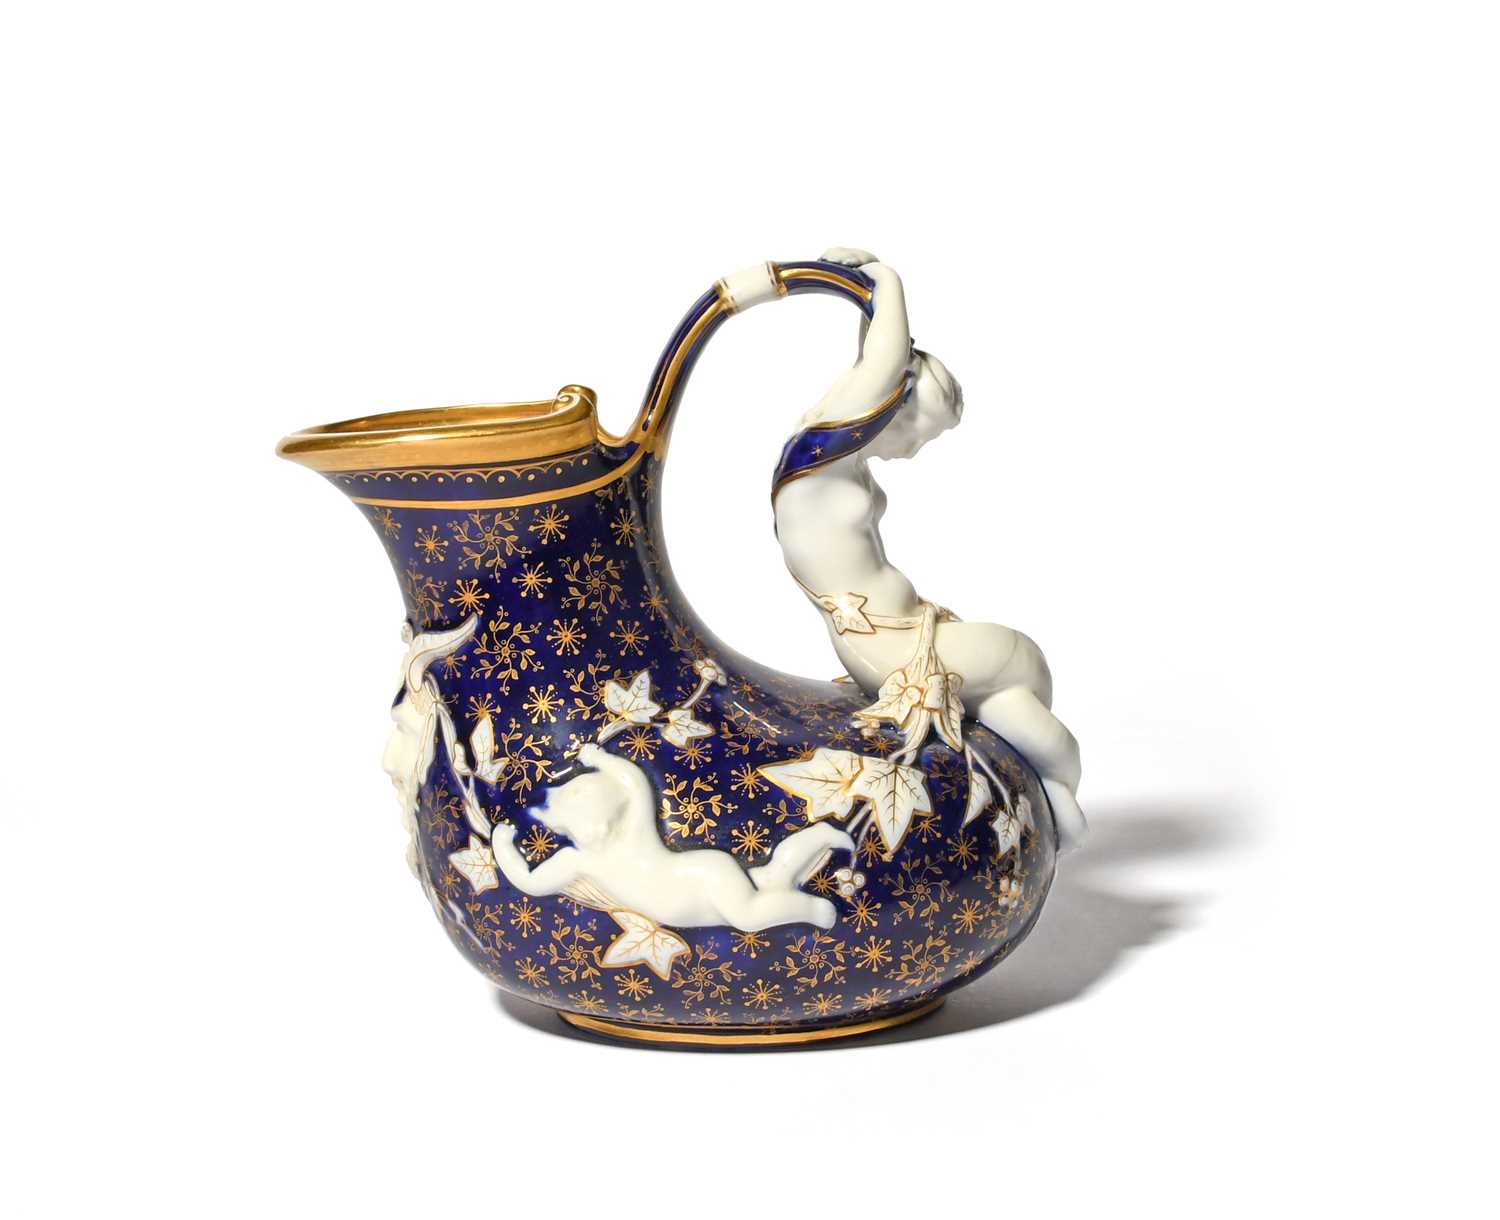 A rare Minton porcelain 'Mermaid' ewer, c.1880, of askos shape, moulded with putti and a horned